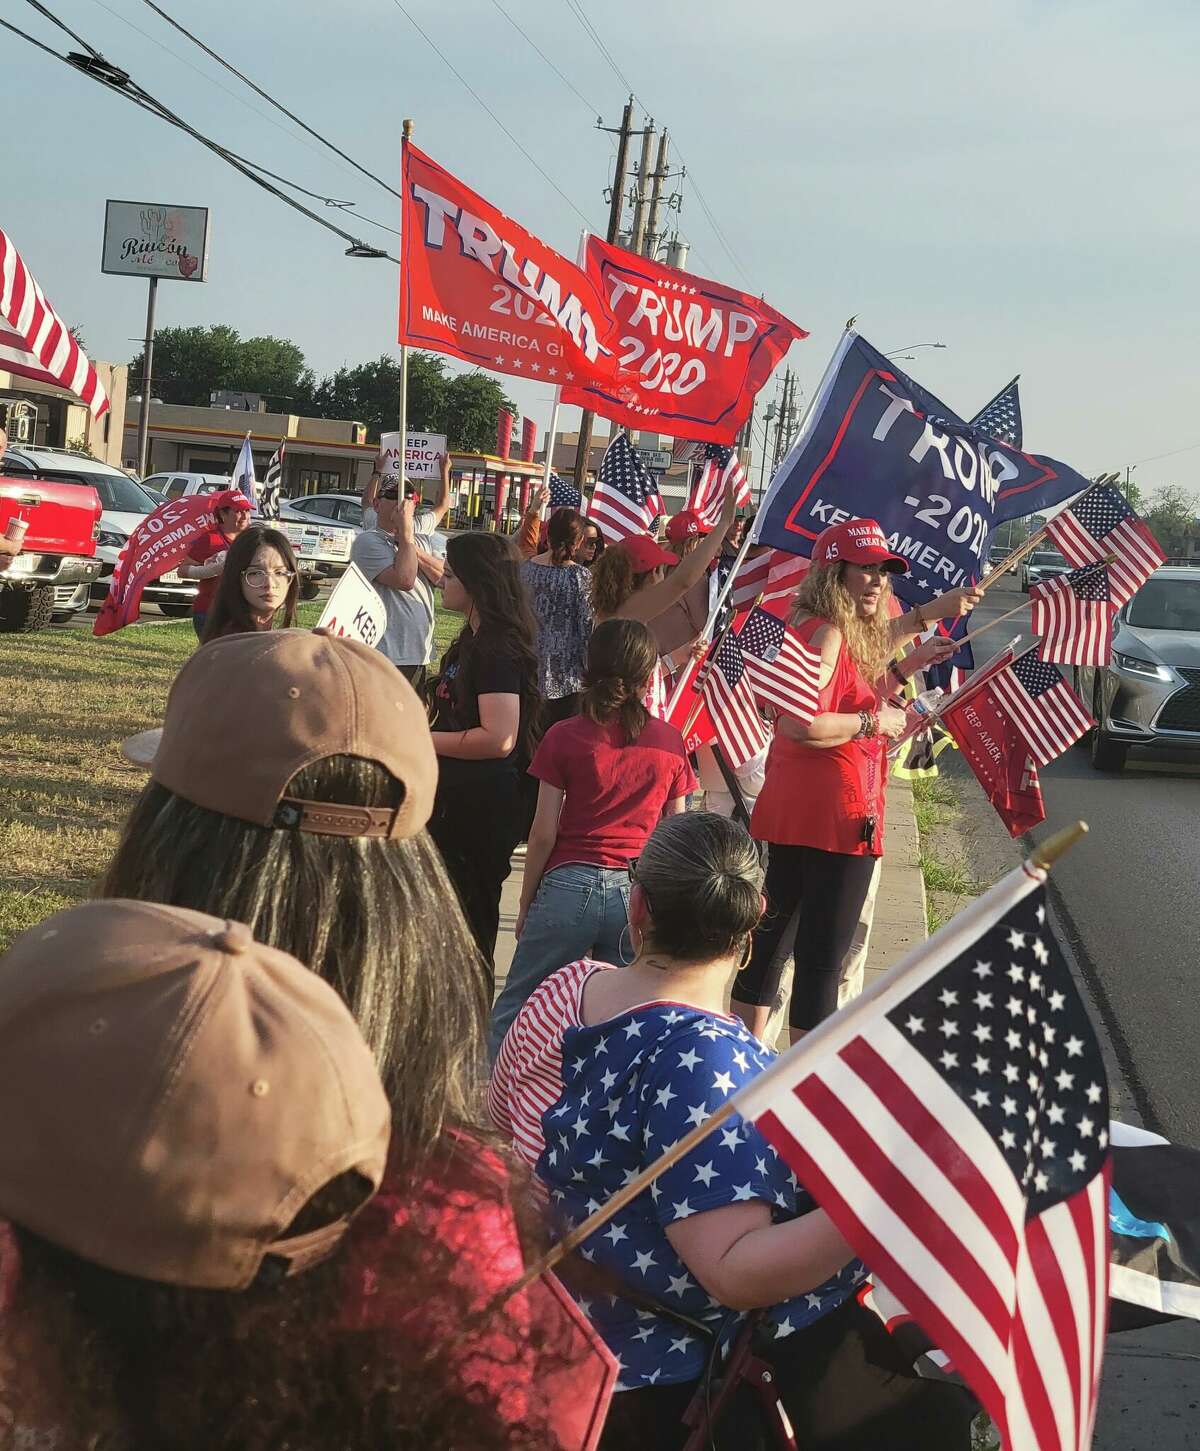 Dozens gathered in Laredo at 5516 McPherson Road for a flag-waving event to support former U.S. President Donald J. Trump on the day he was indicted in New York.